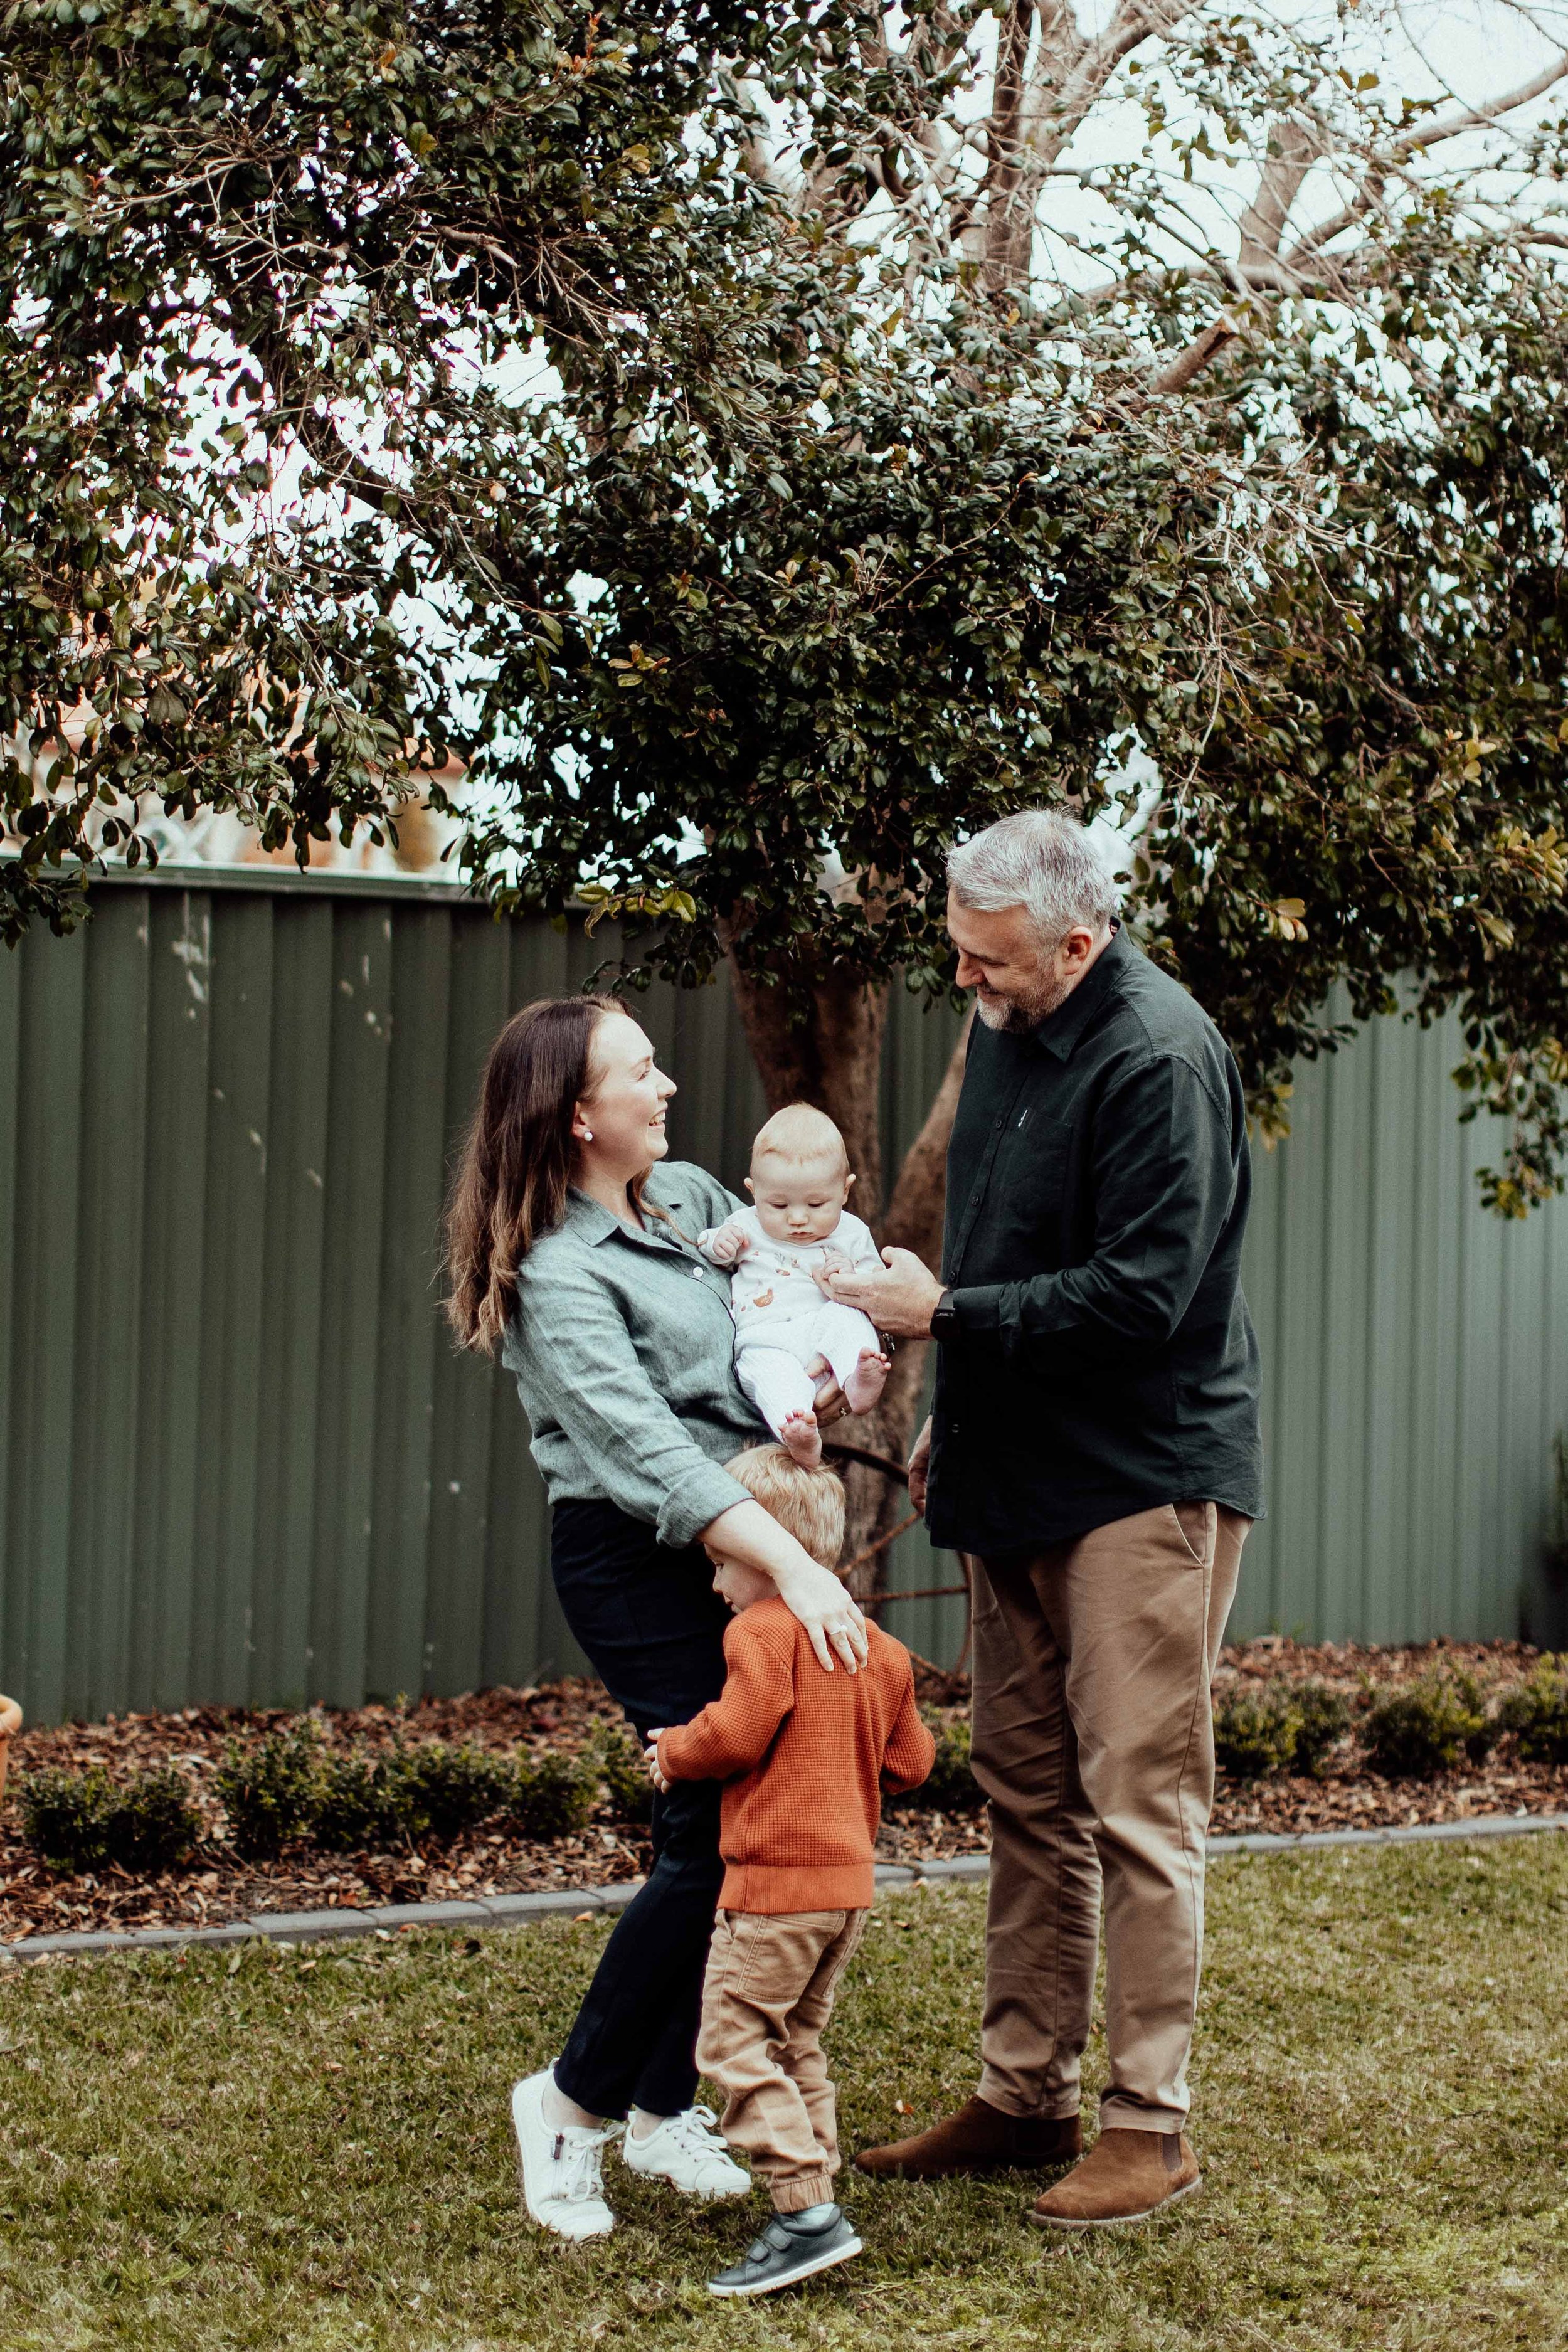 donnelly-family-inhome-family-lifestyle-wollondilly-camden-macarthur-sydney-photography-www.emilyobrienphotography.net-22.jpg